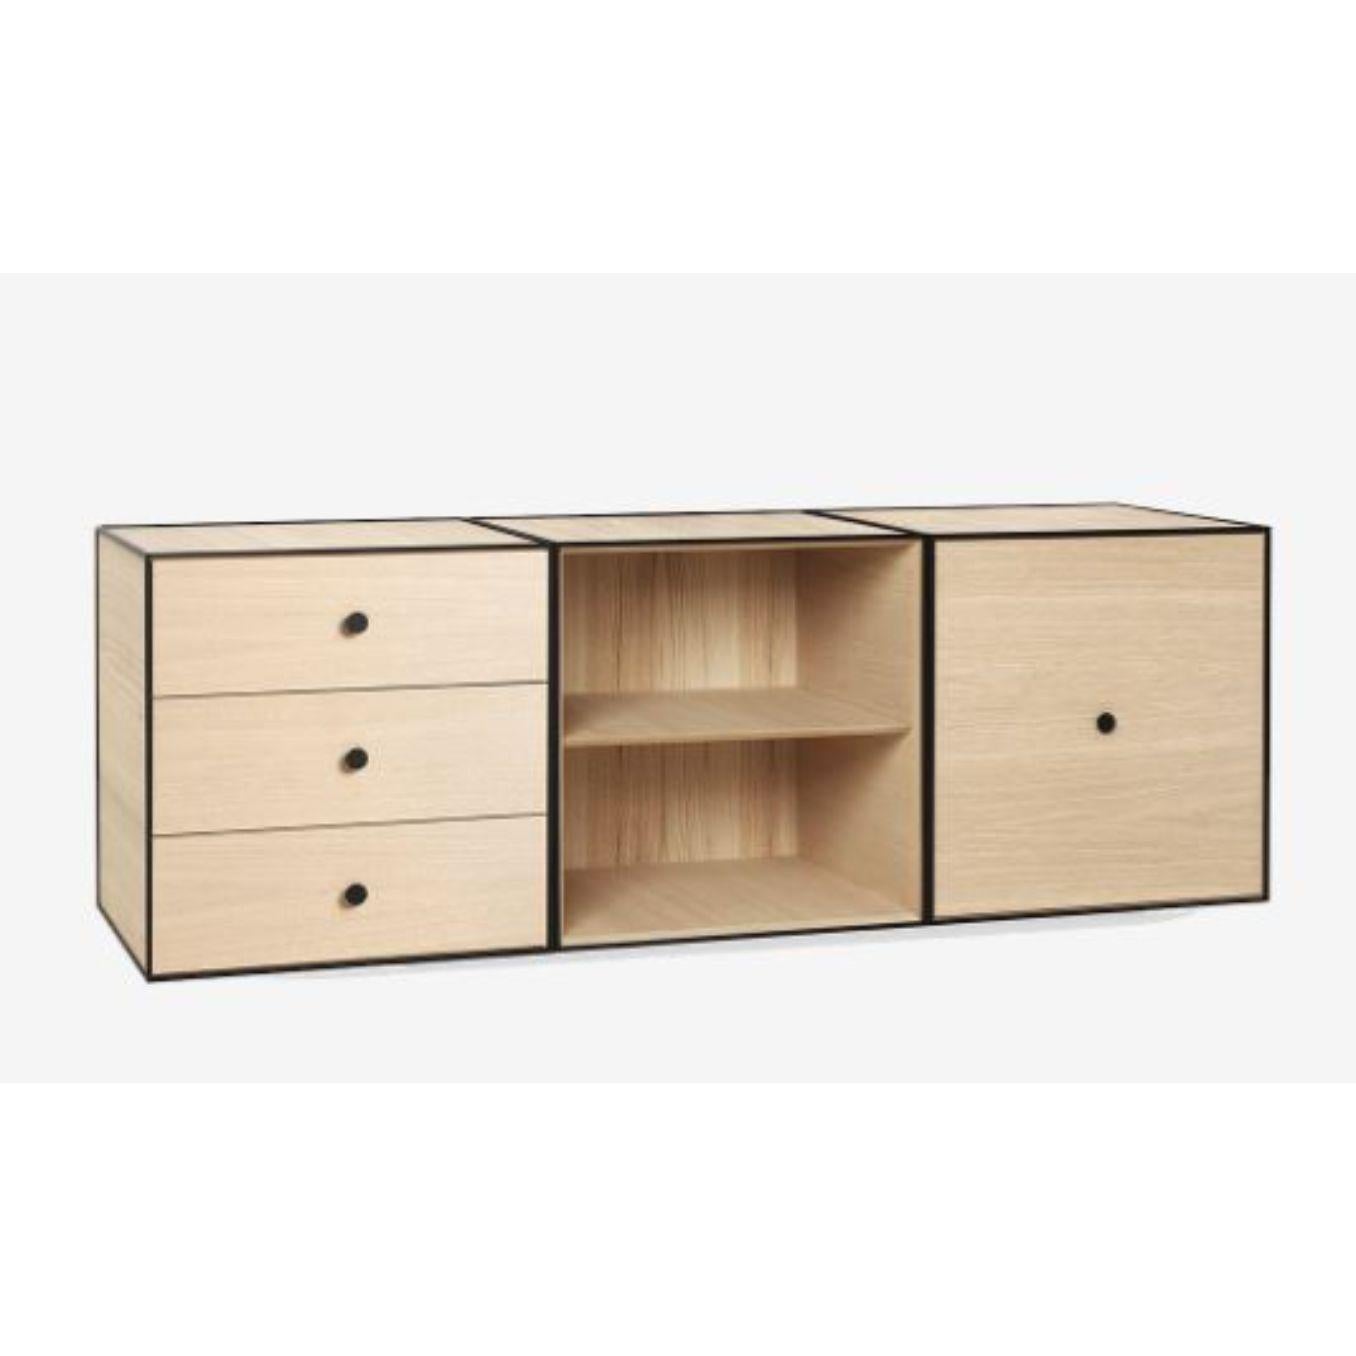 49 Oak frame box Trio by Lassen
Dimensions: D 147 x W 42 x H 49 cm 
Materials: finér, melamin, melamine, metal, veneer, oak
Also available in different colours and dimensions.
Weight: 45 Kg

By Lassen is a Danish design brand focused on iconic